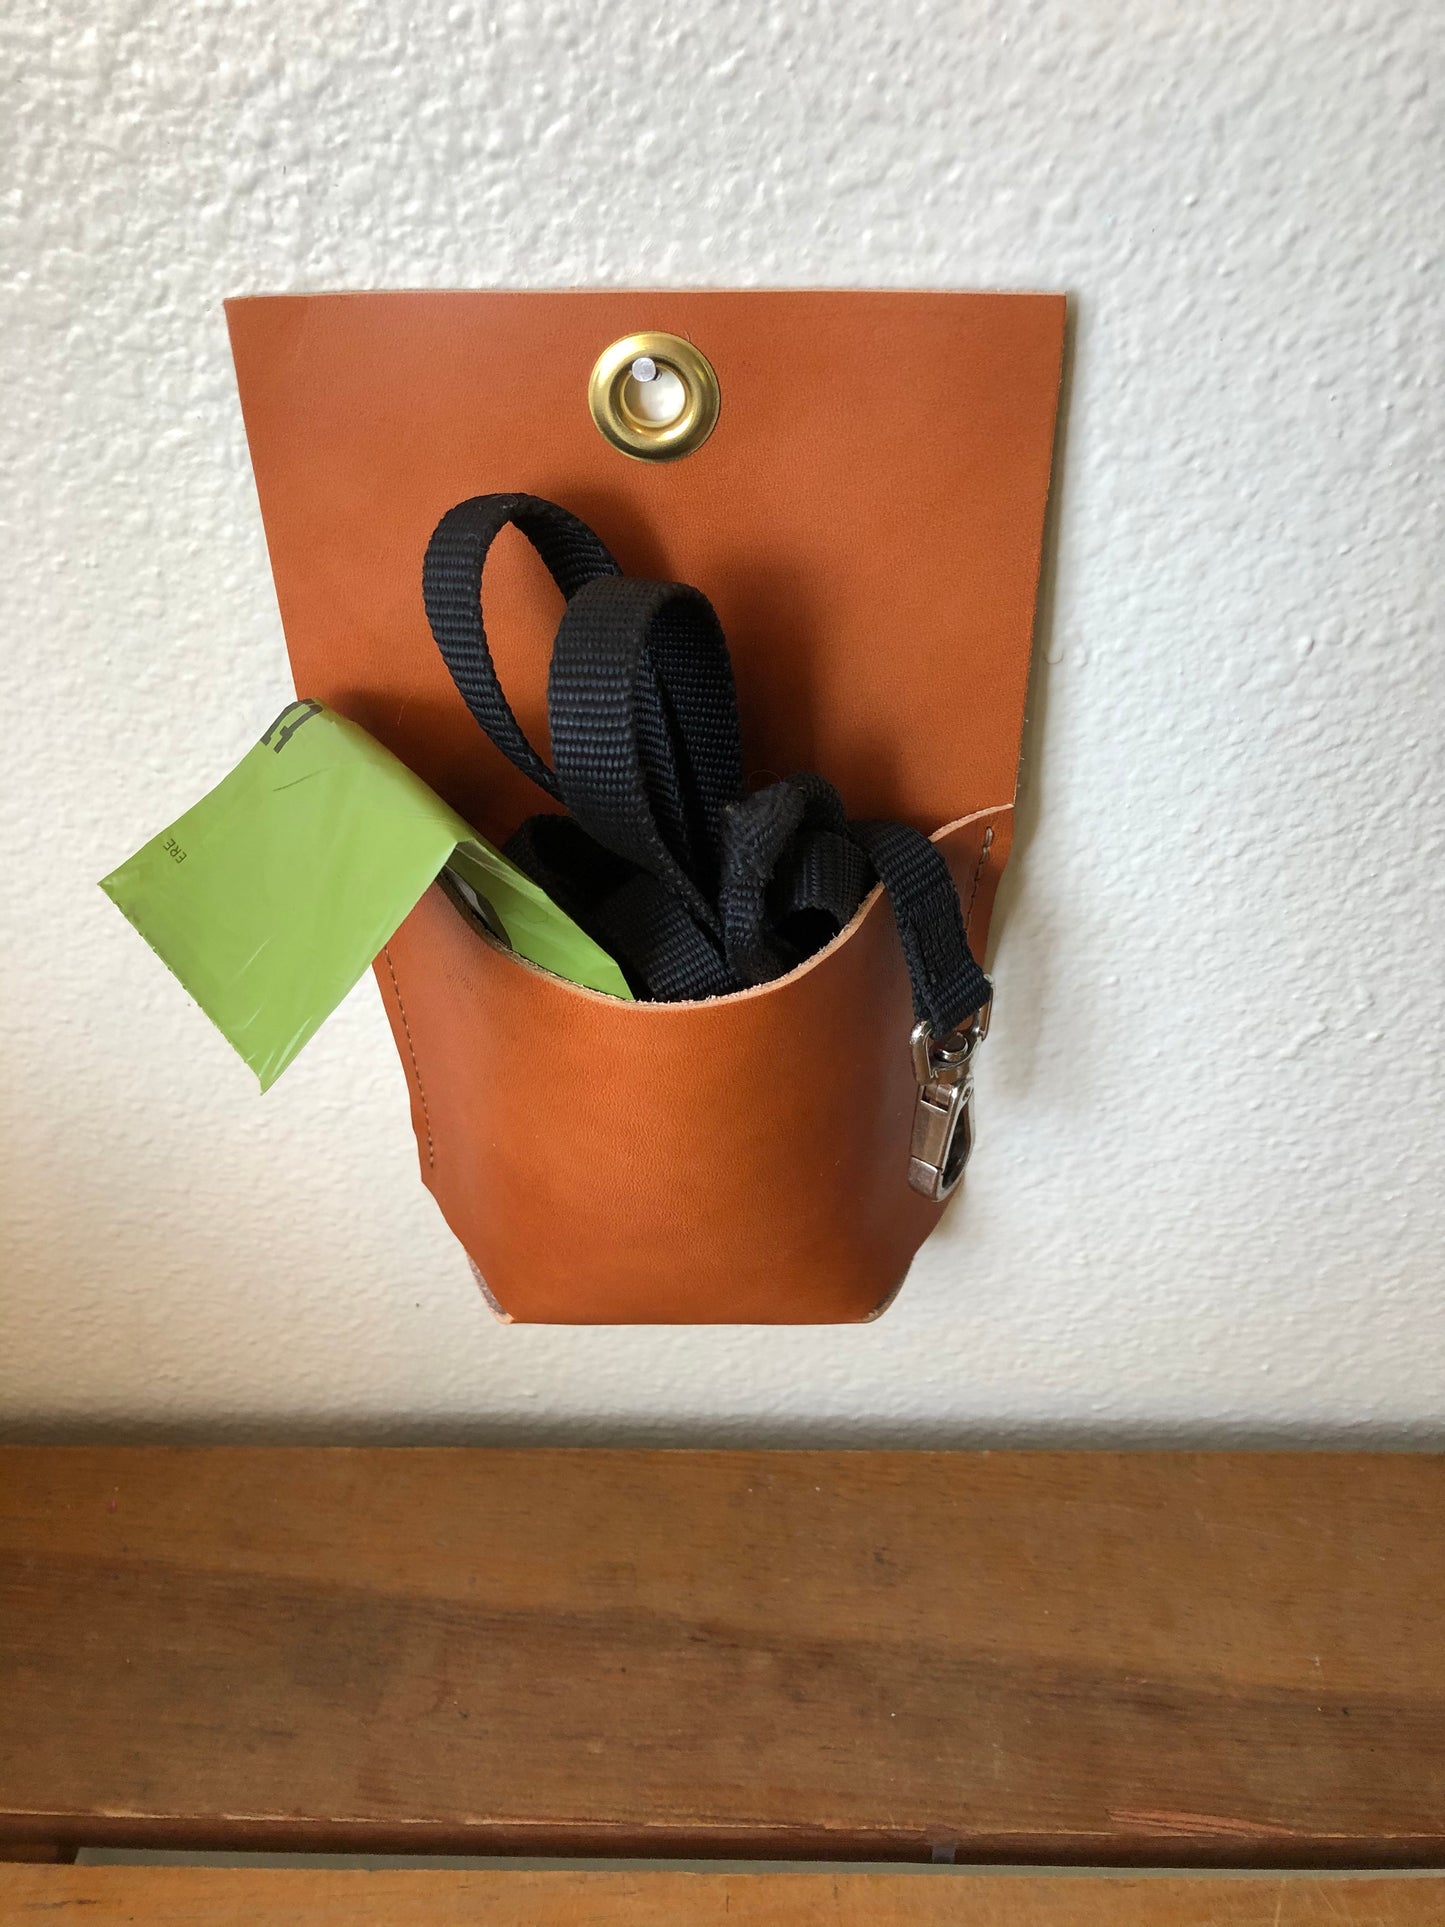 Leather Wall Caddy | Hanging Wall Pocket | Pencil Holder